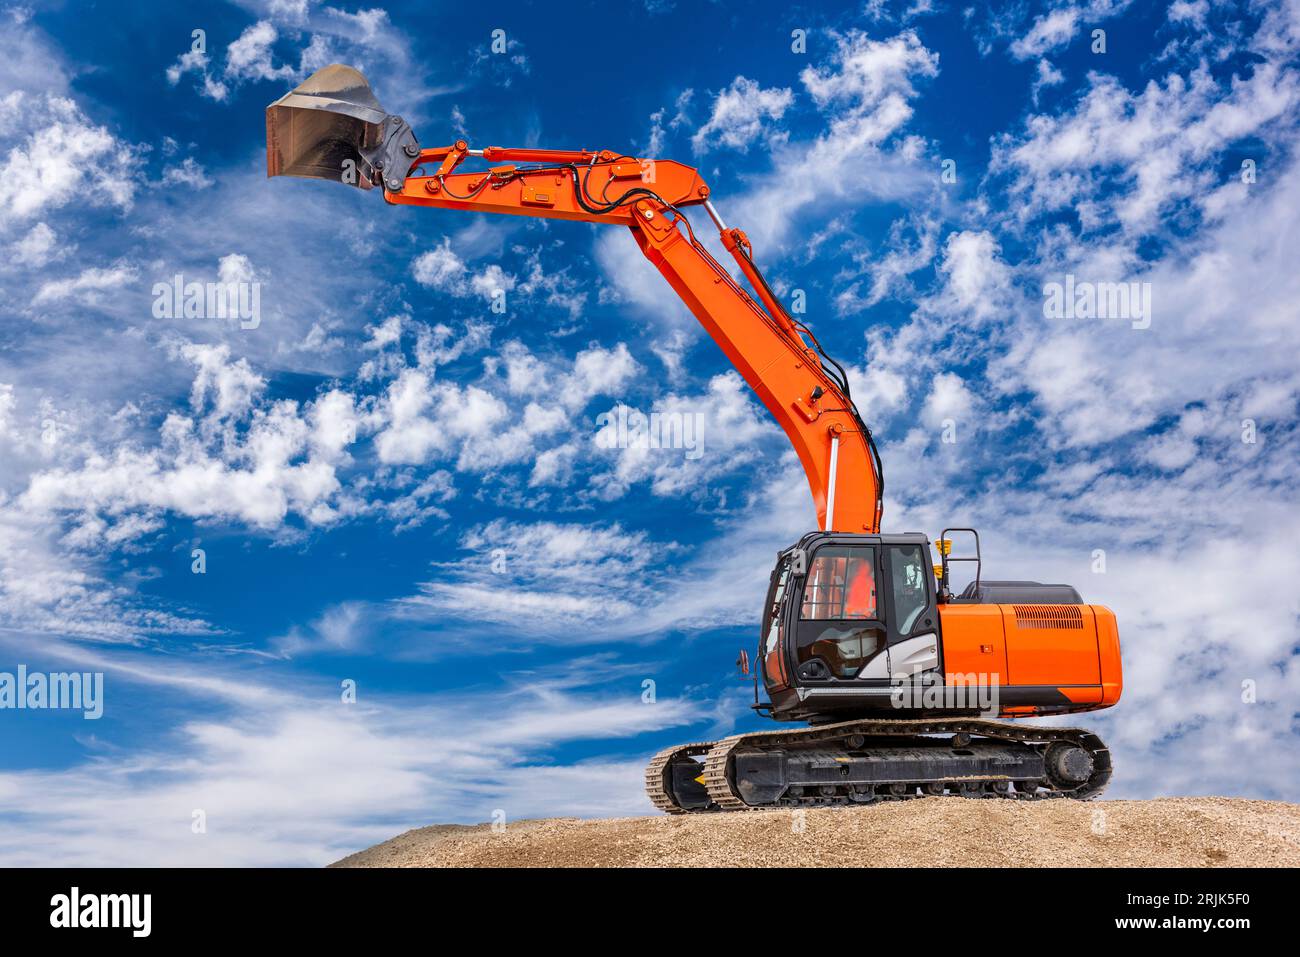 excavator is in work and digging at construction site Stock Photo